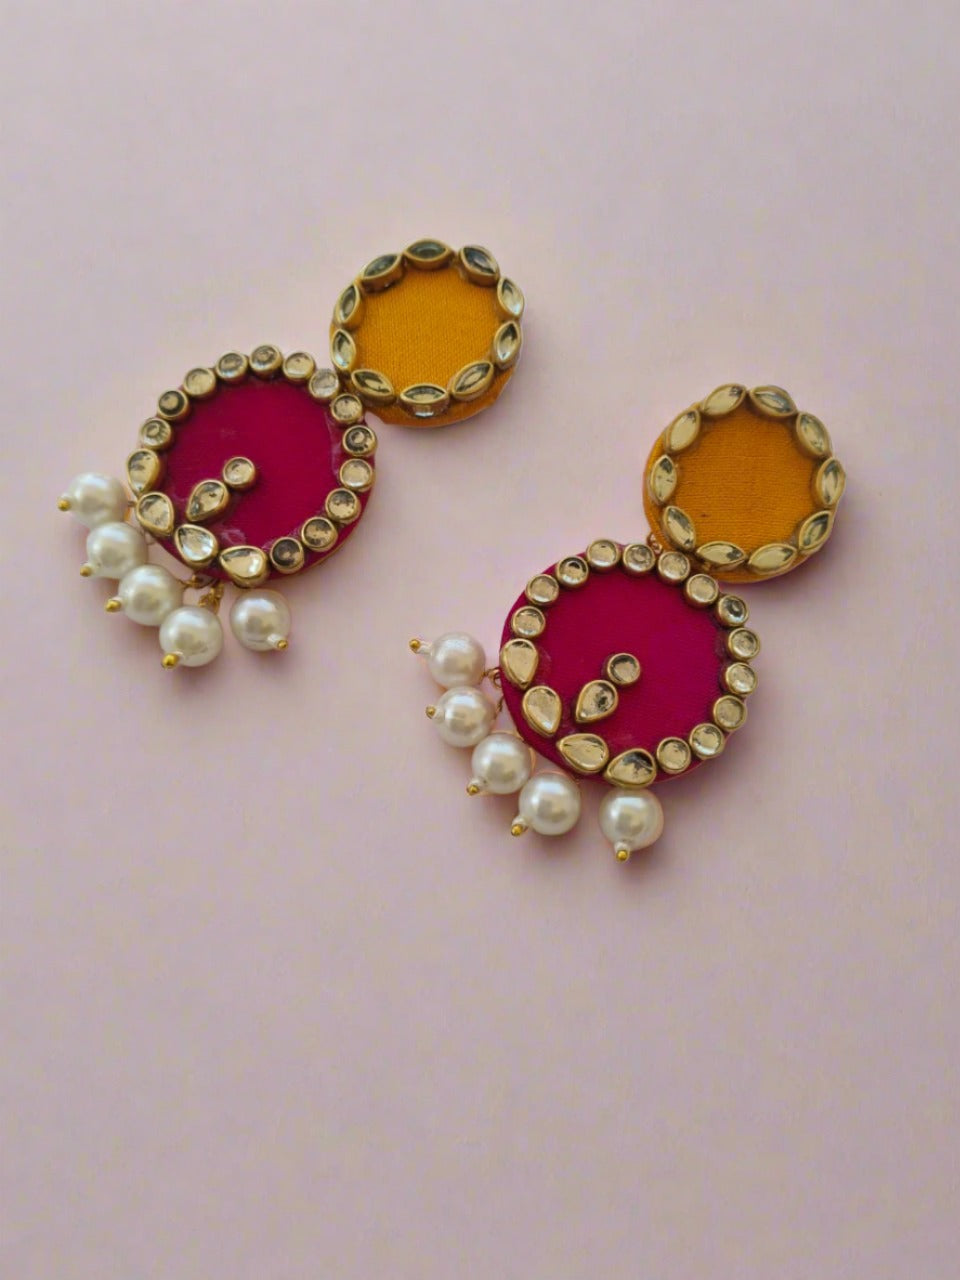 Pink and yellow round earrings with kundan border and white pearls on white grey backdrop